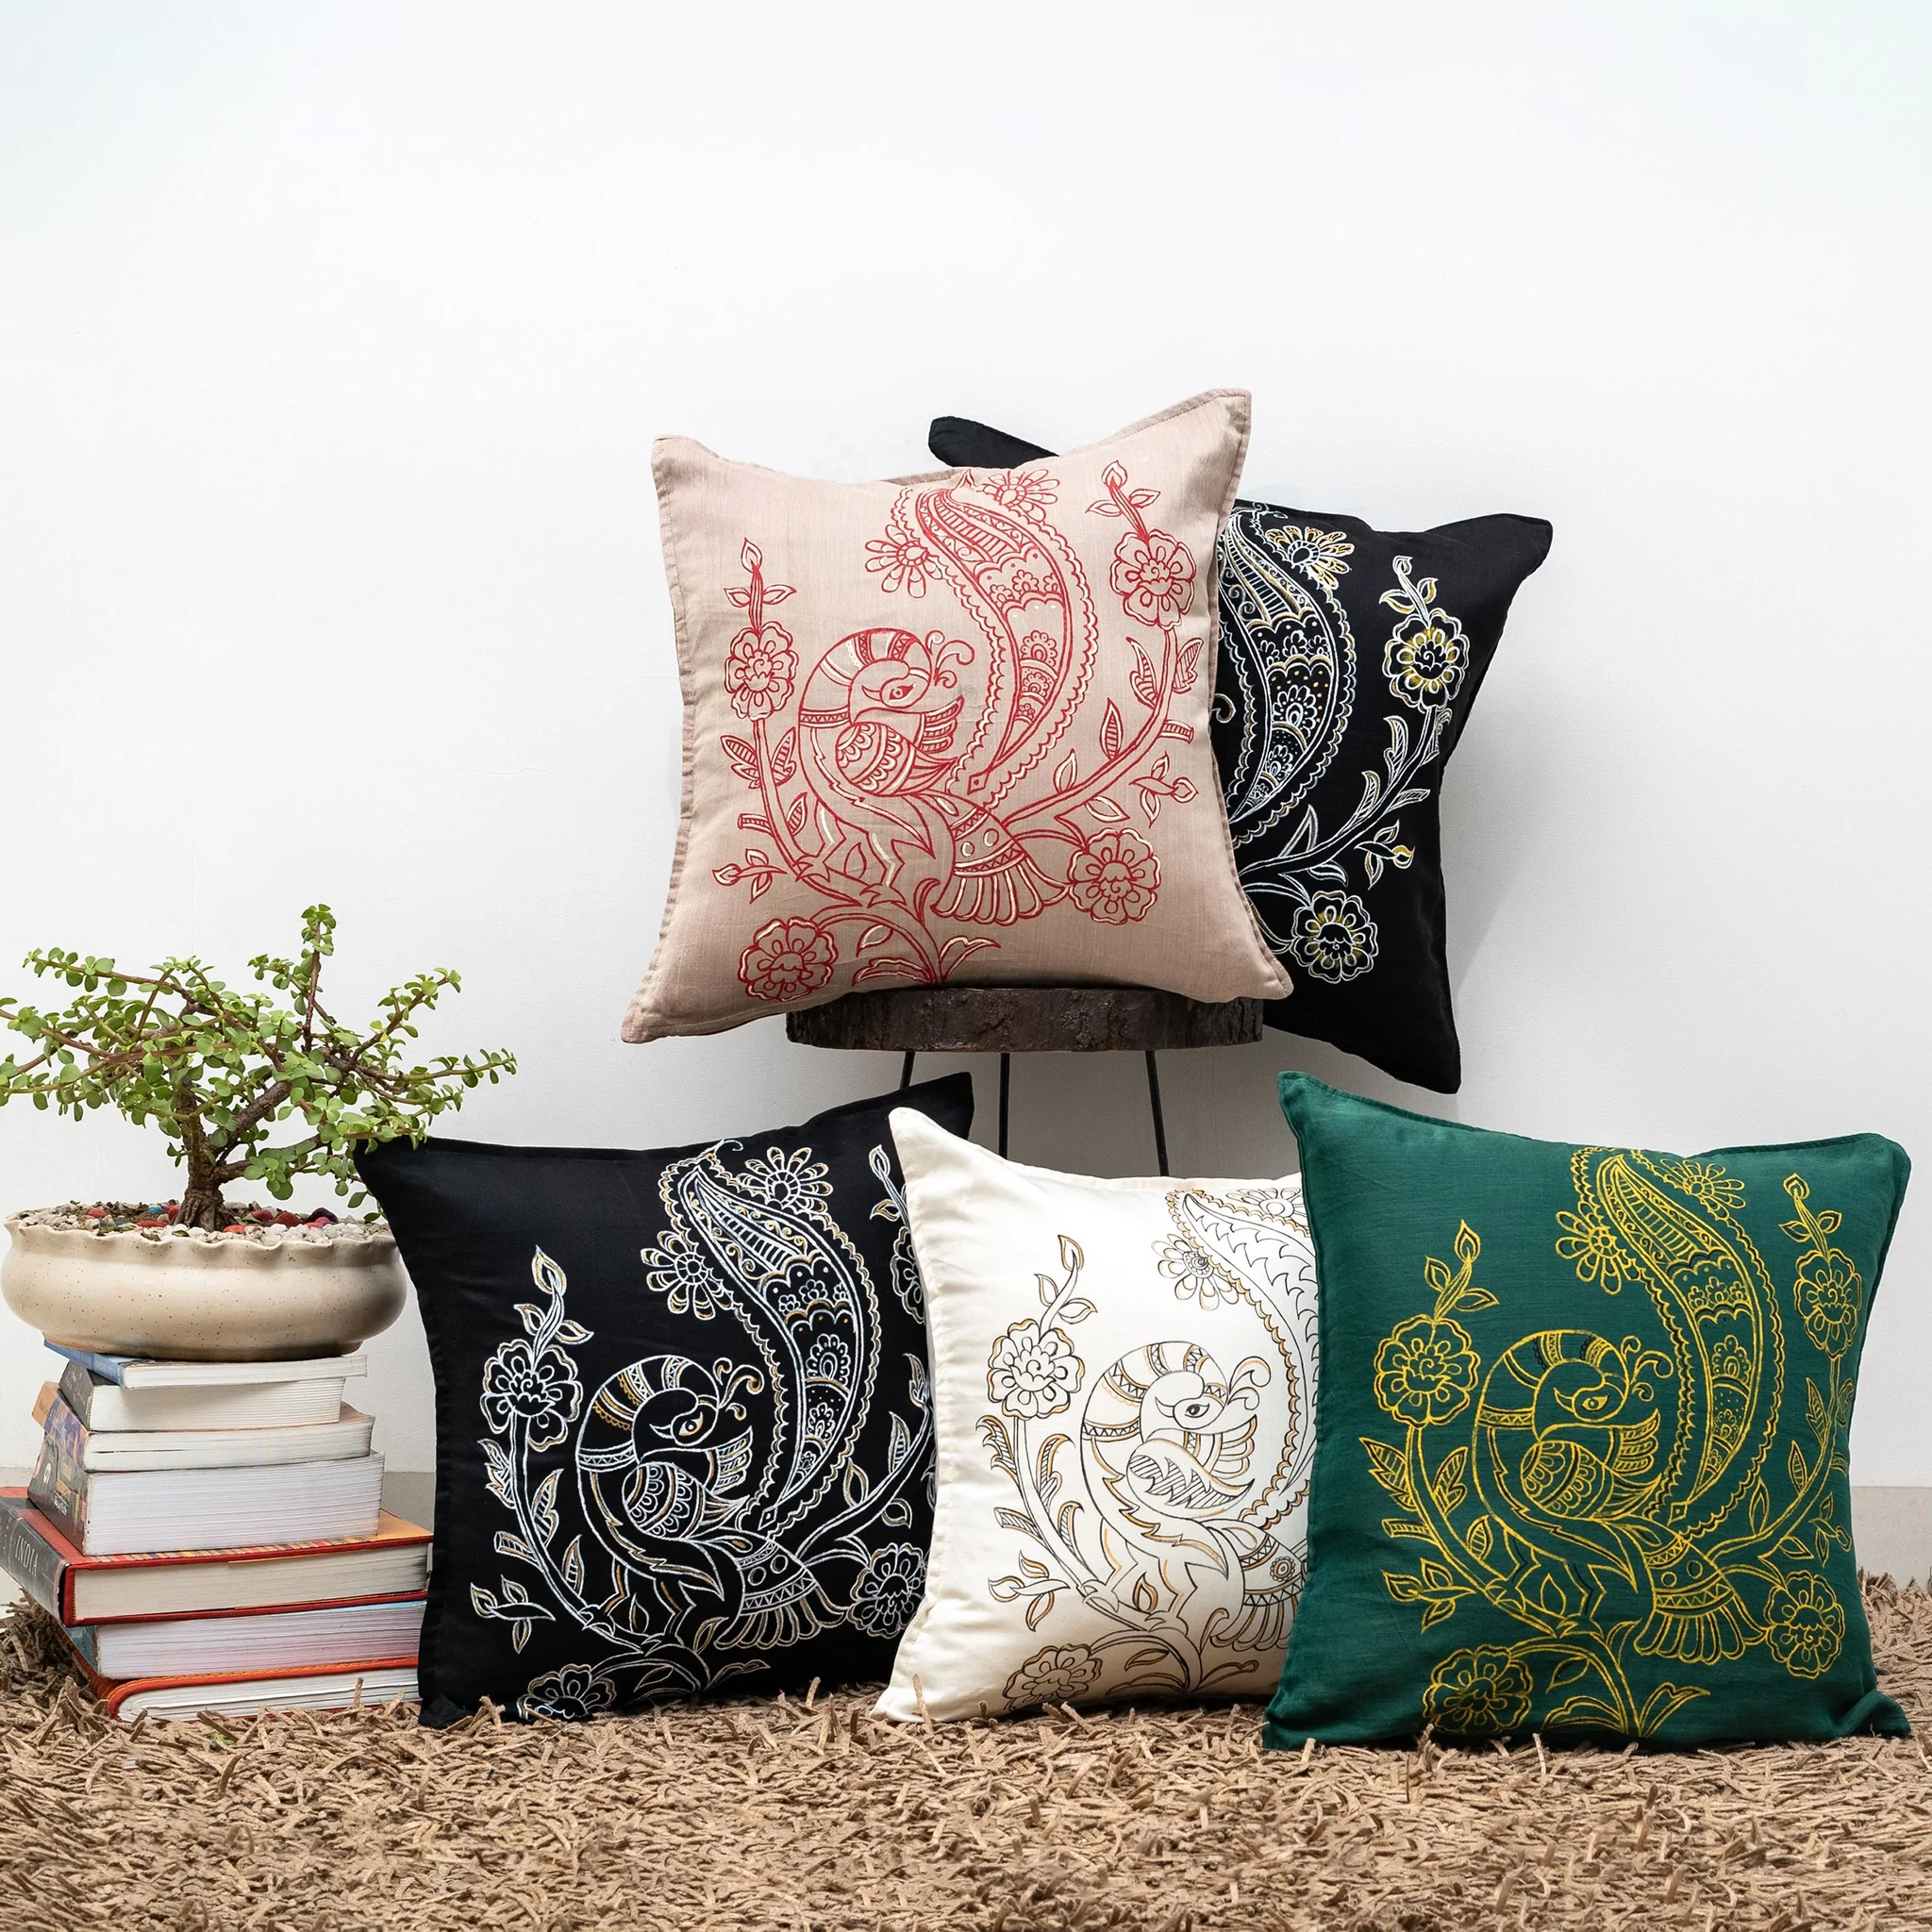 Peacock Cushion Cover Set Of 5 1024×1024@2x